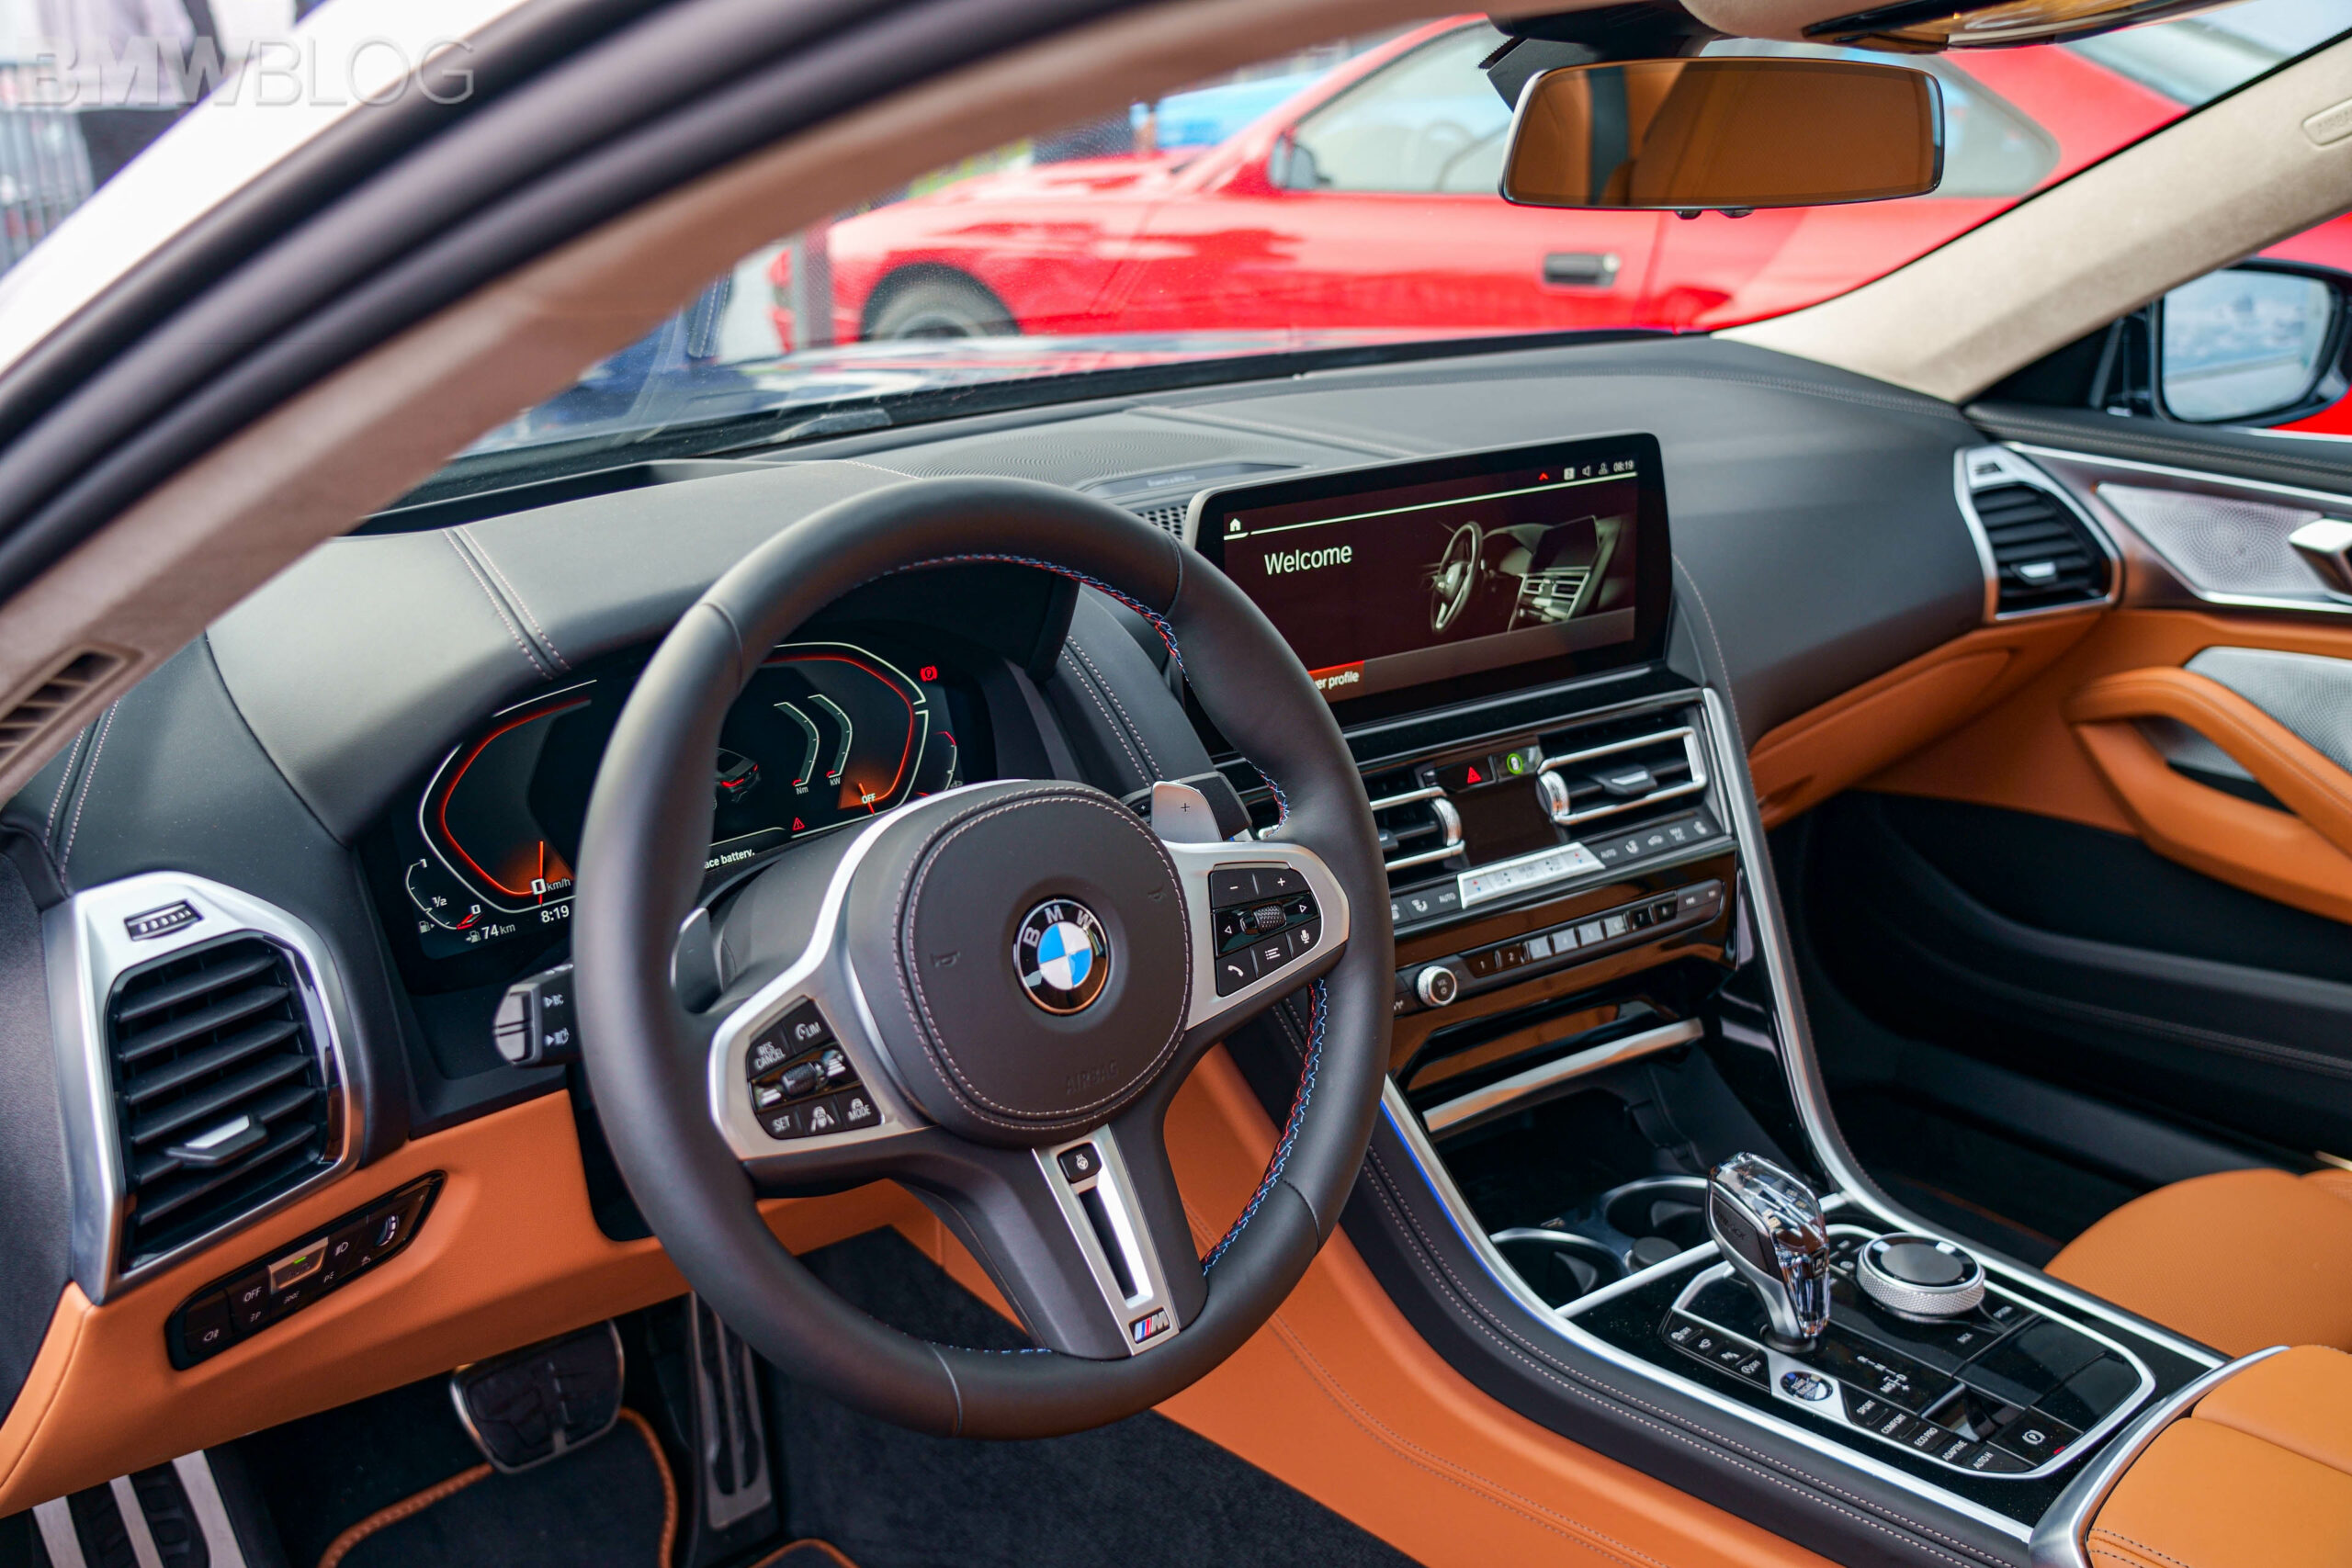 2023 BMW 8 Series Facelift launches at The Amelia Concours d'Elegance